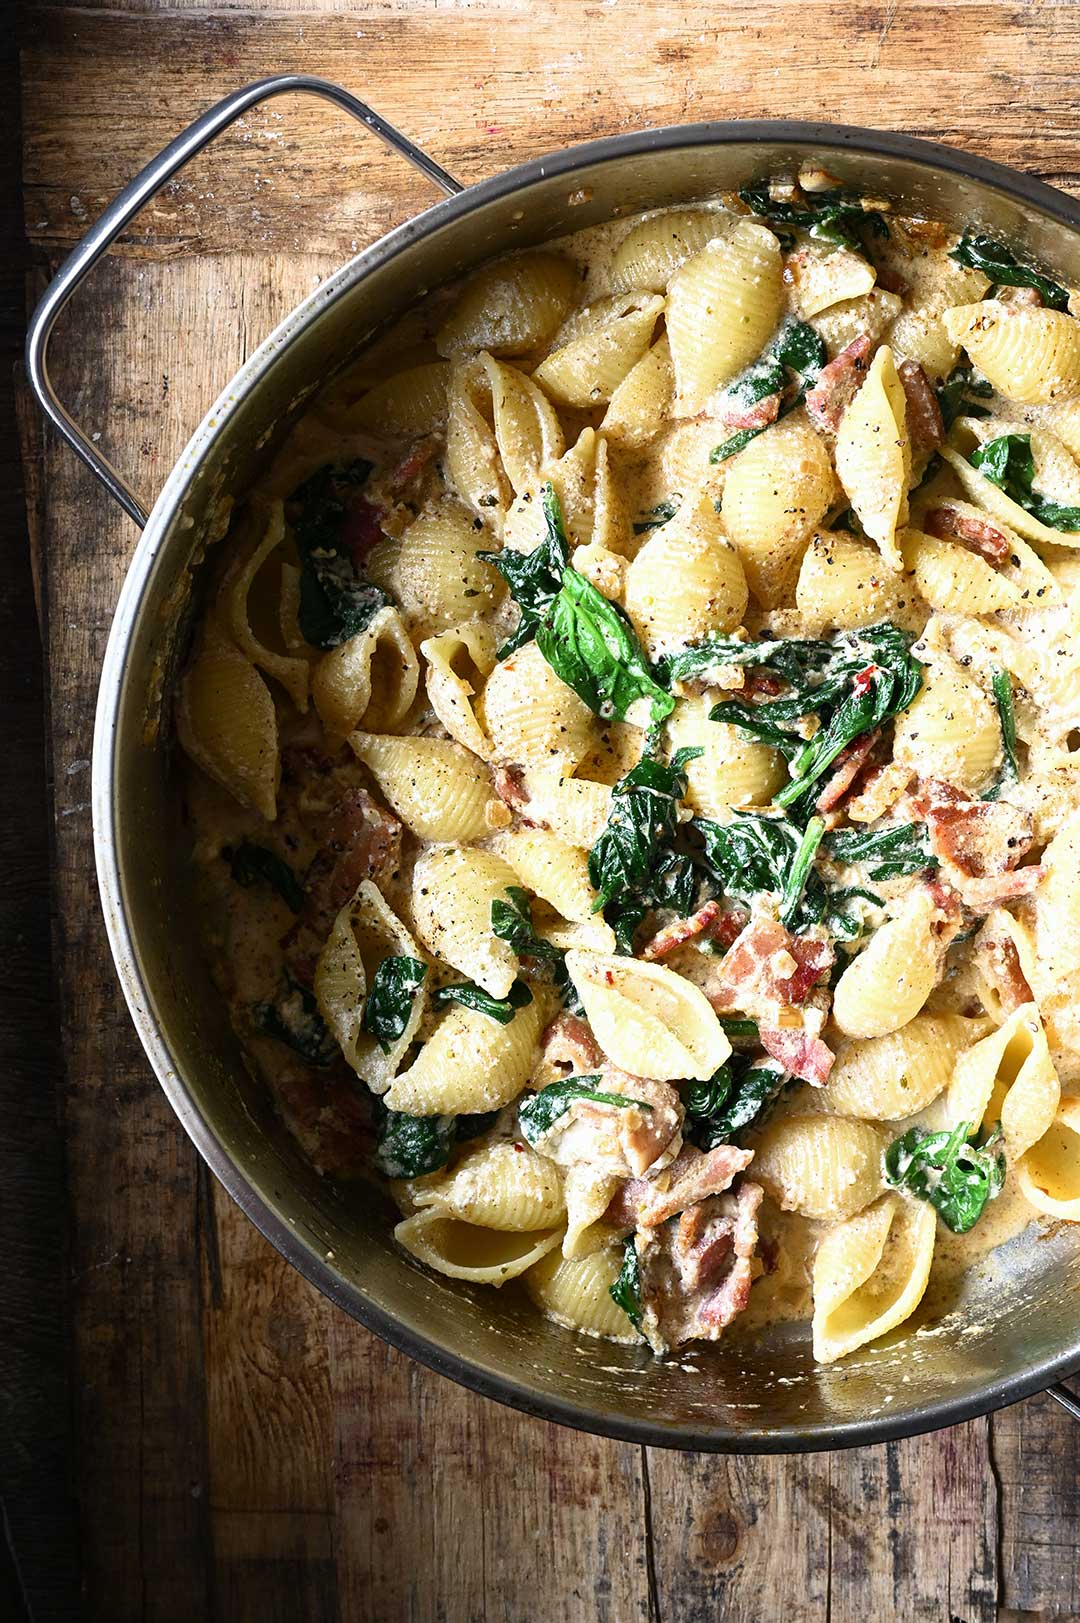 Spinach and Bacon Pasta with Ricotta - Serving Dumplings